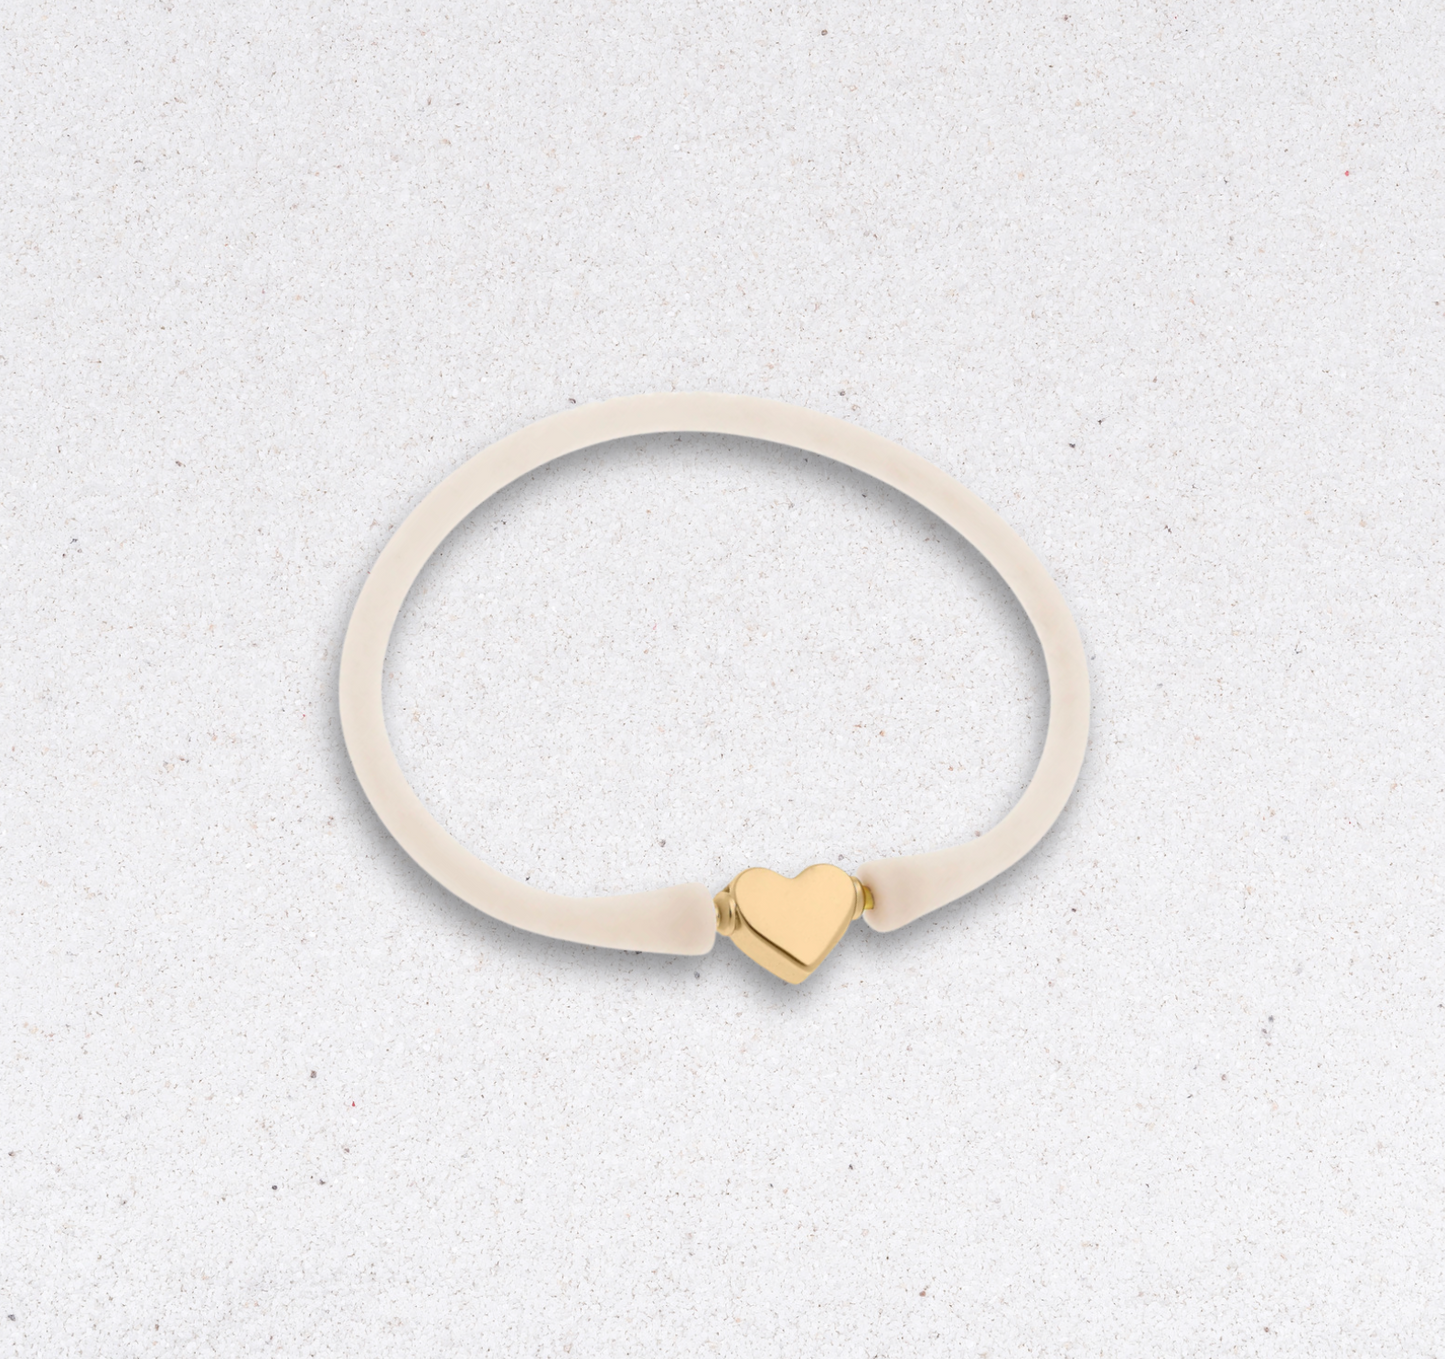 24K Gold Plated Bali Heart Bead Silicone Bracelet